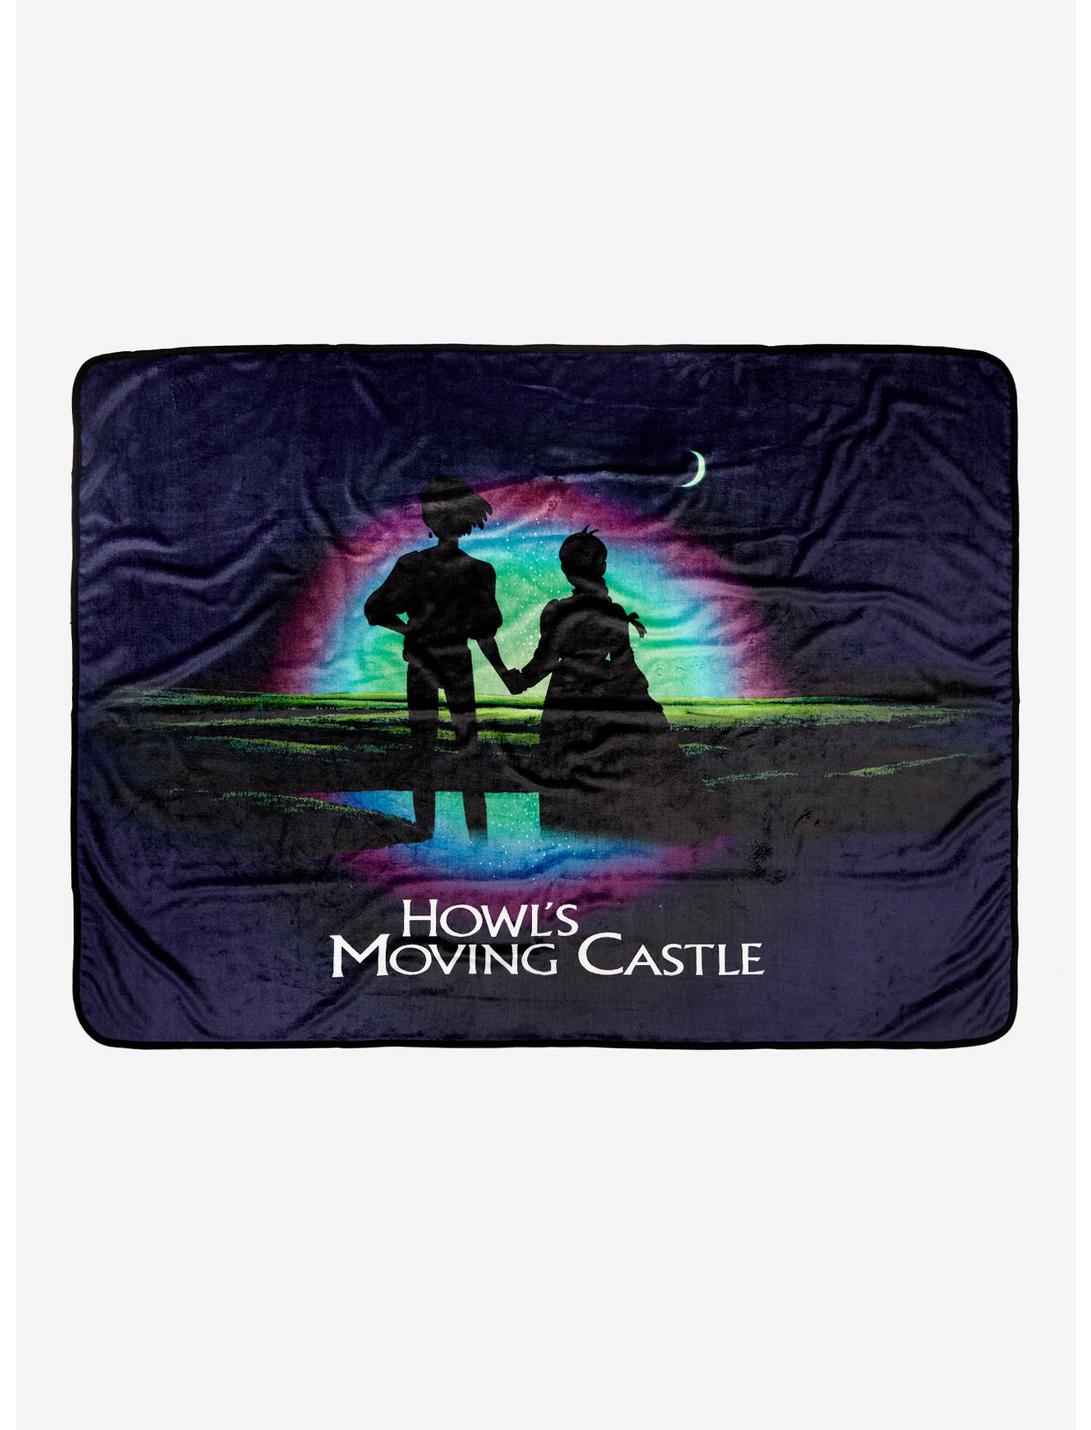 Studio Ghibli Howl’s Moving Castle Sophie & Howl Night Sky Silhouette Throw Blanket - BoxLunch Exclusive, , hi-res